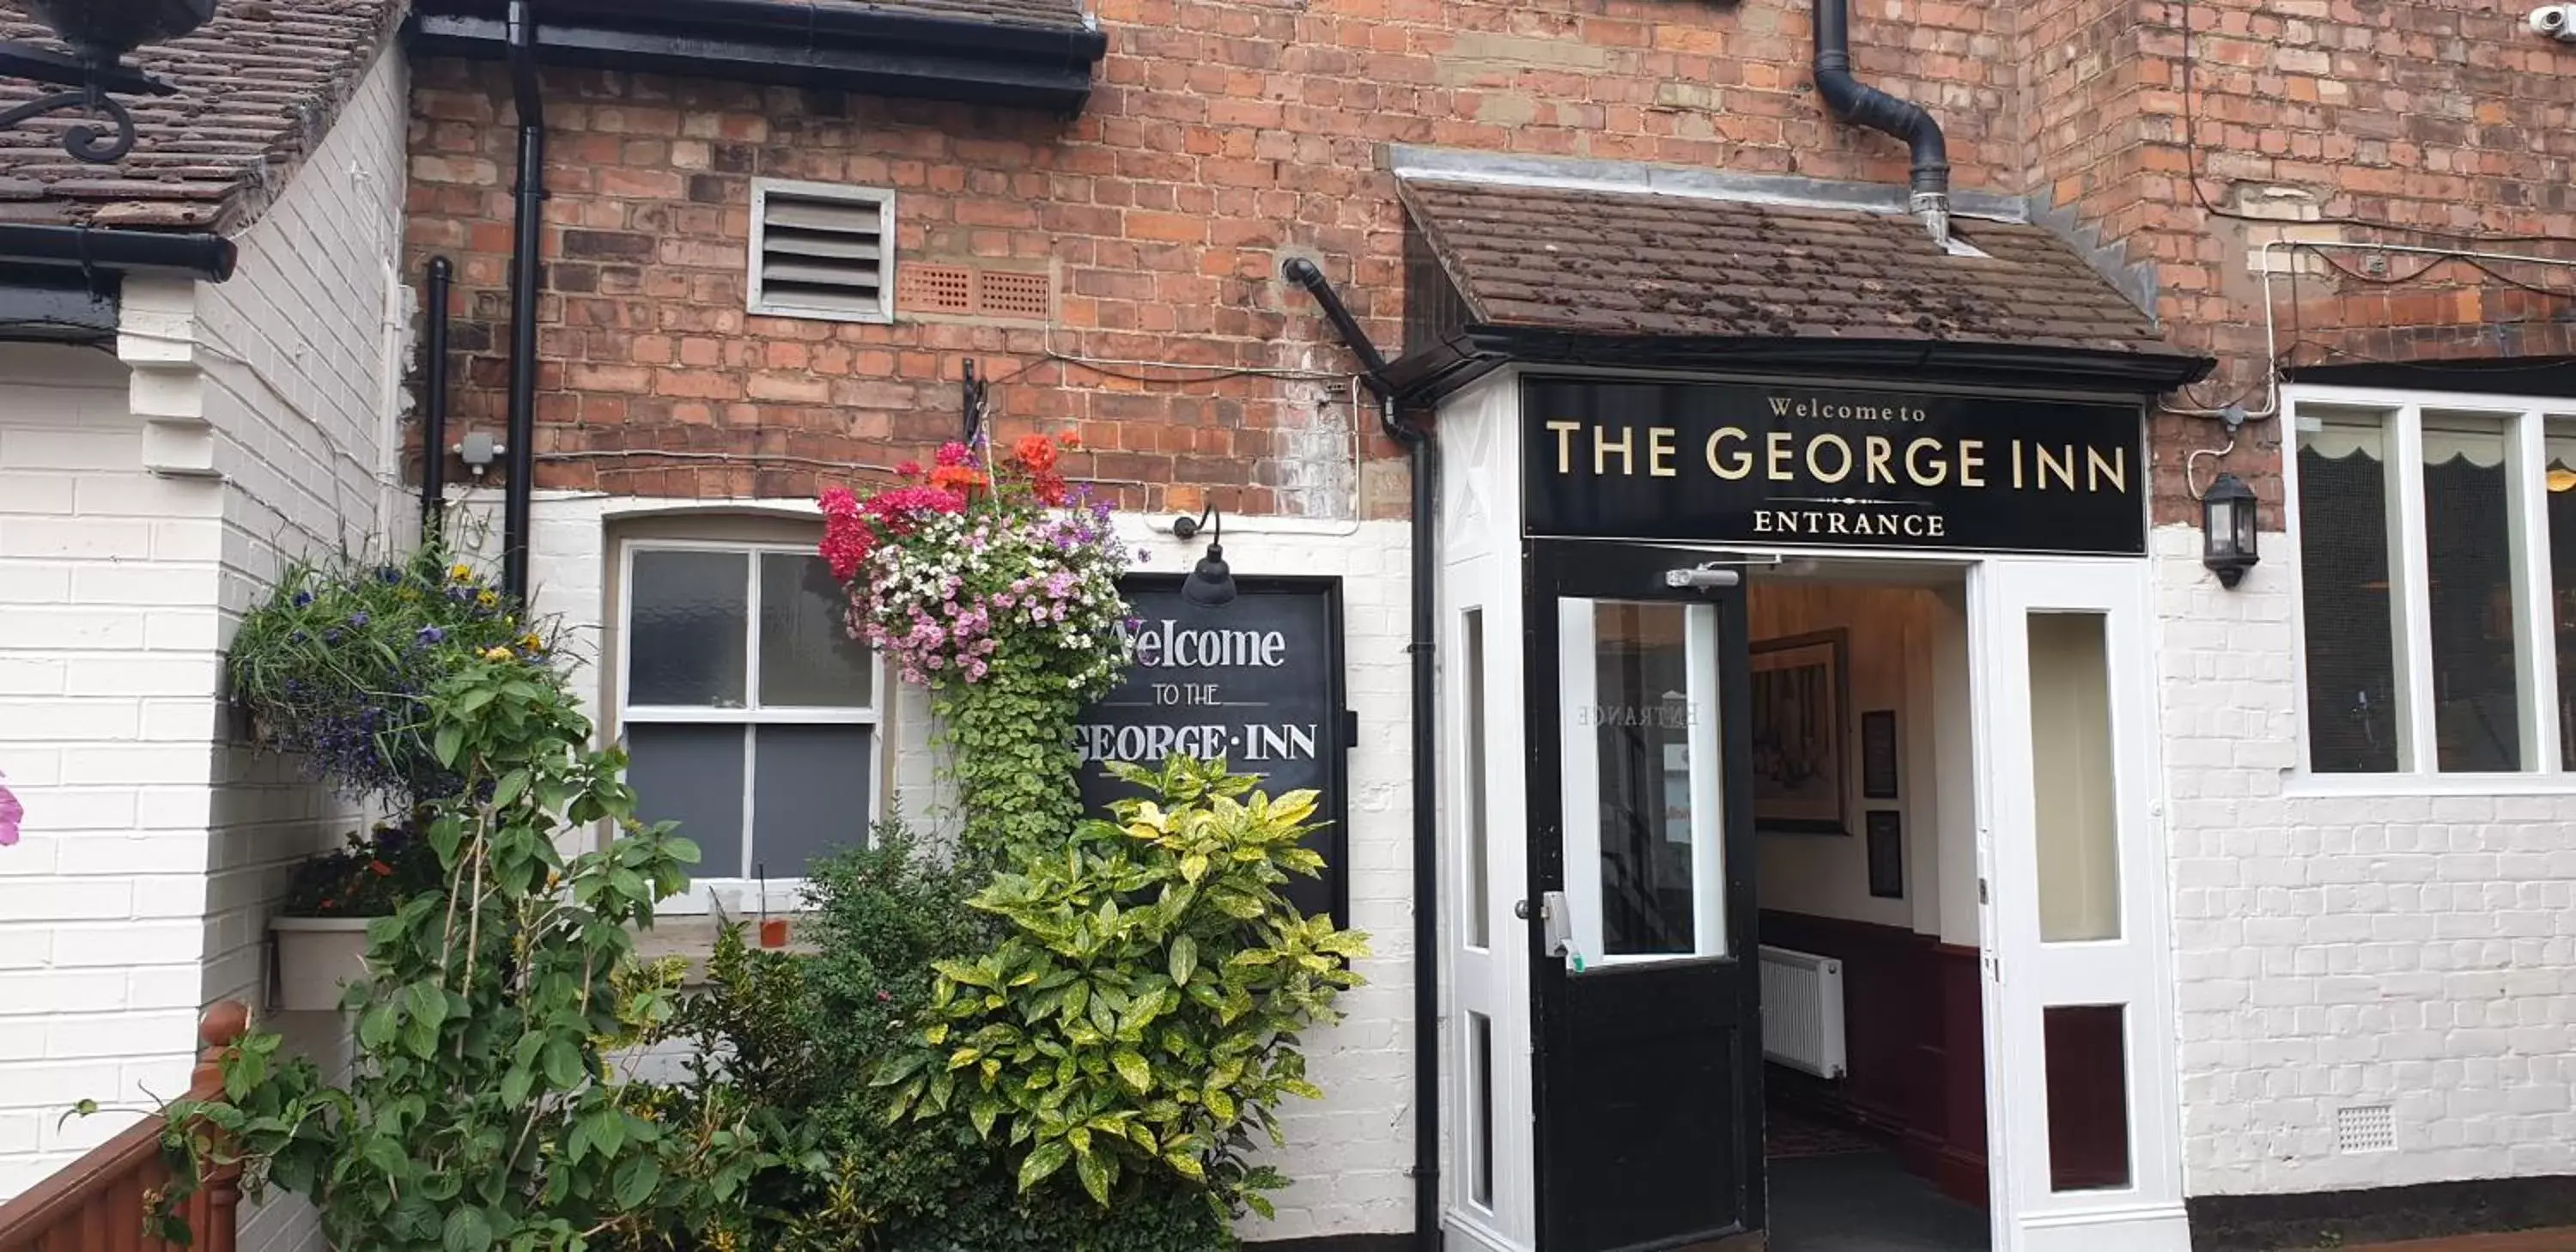 Property Building in The George Inn